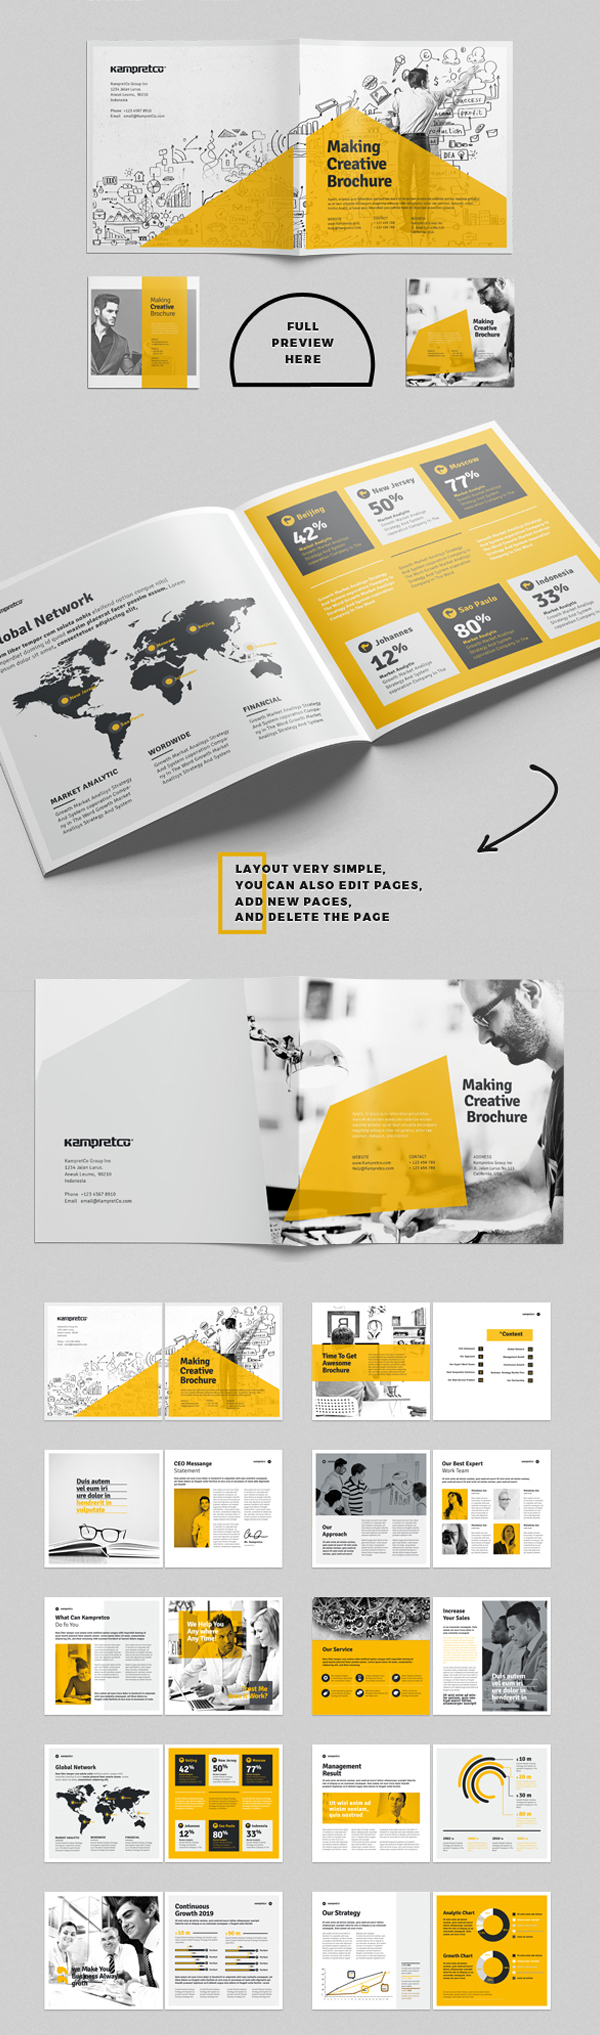 26 Pages Corporate Square Brochure Design